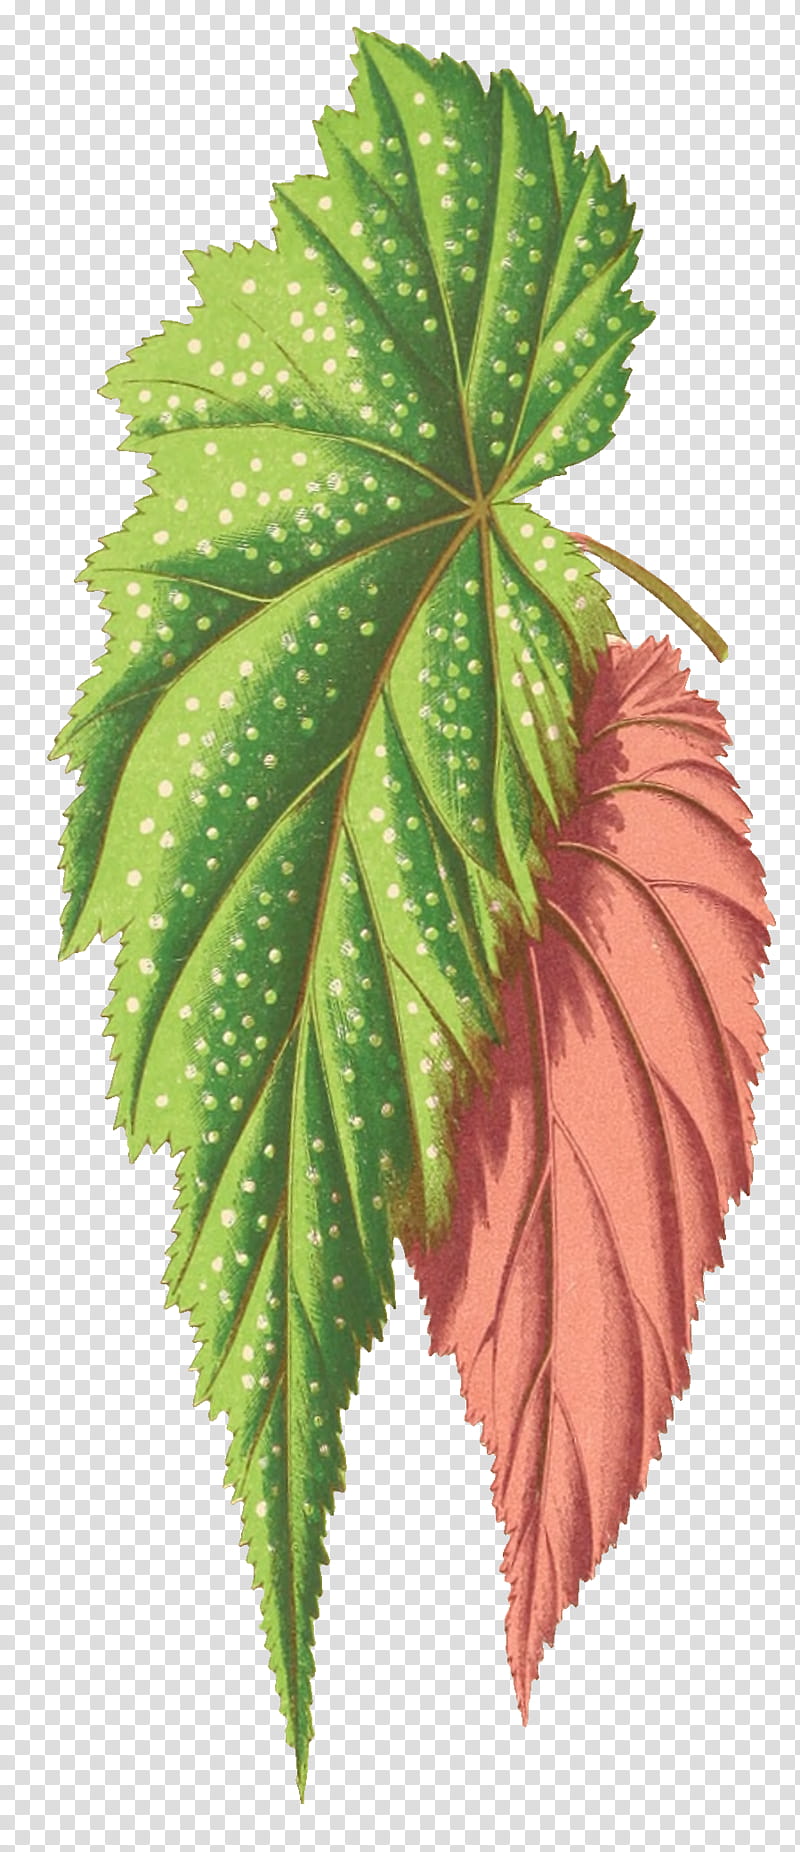 Drawing Of Family, Leaf, Paintedleaf Begonia, Alamy, Plants, Flower, Tree, Hemp Family transparent background PNG clipart